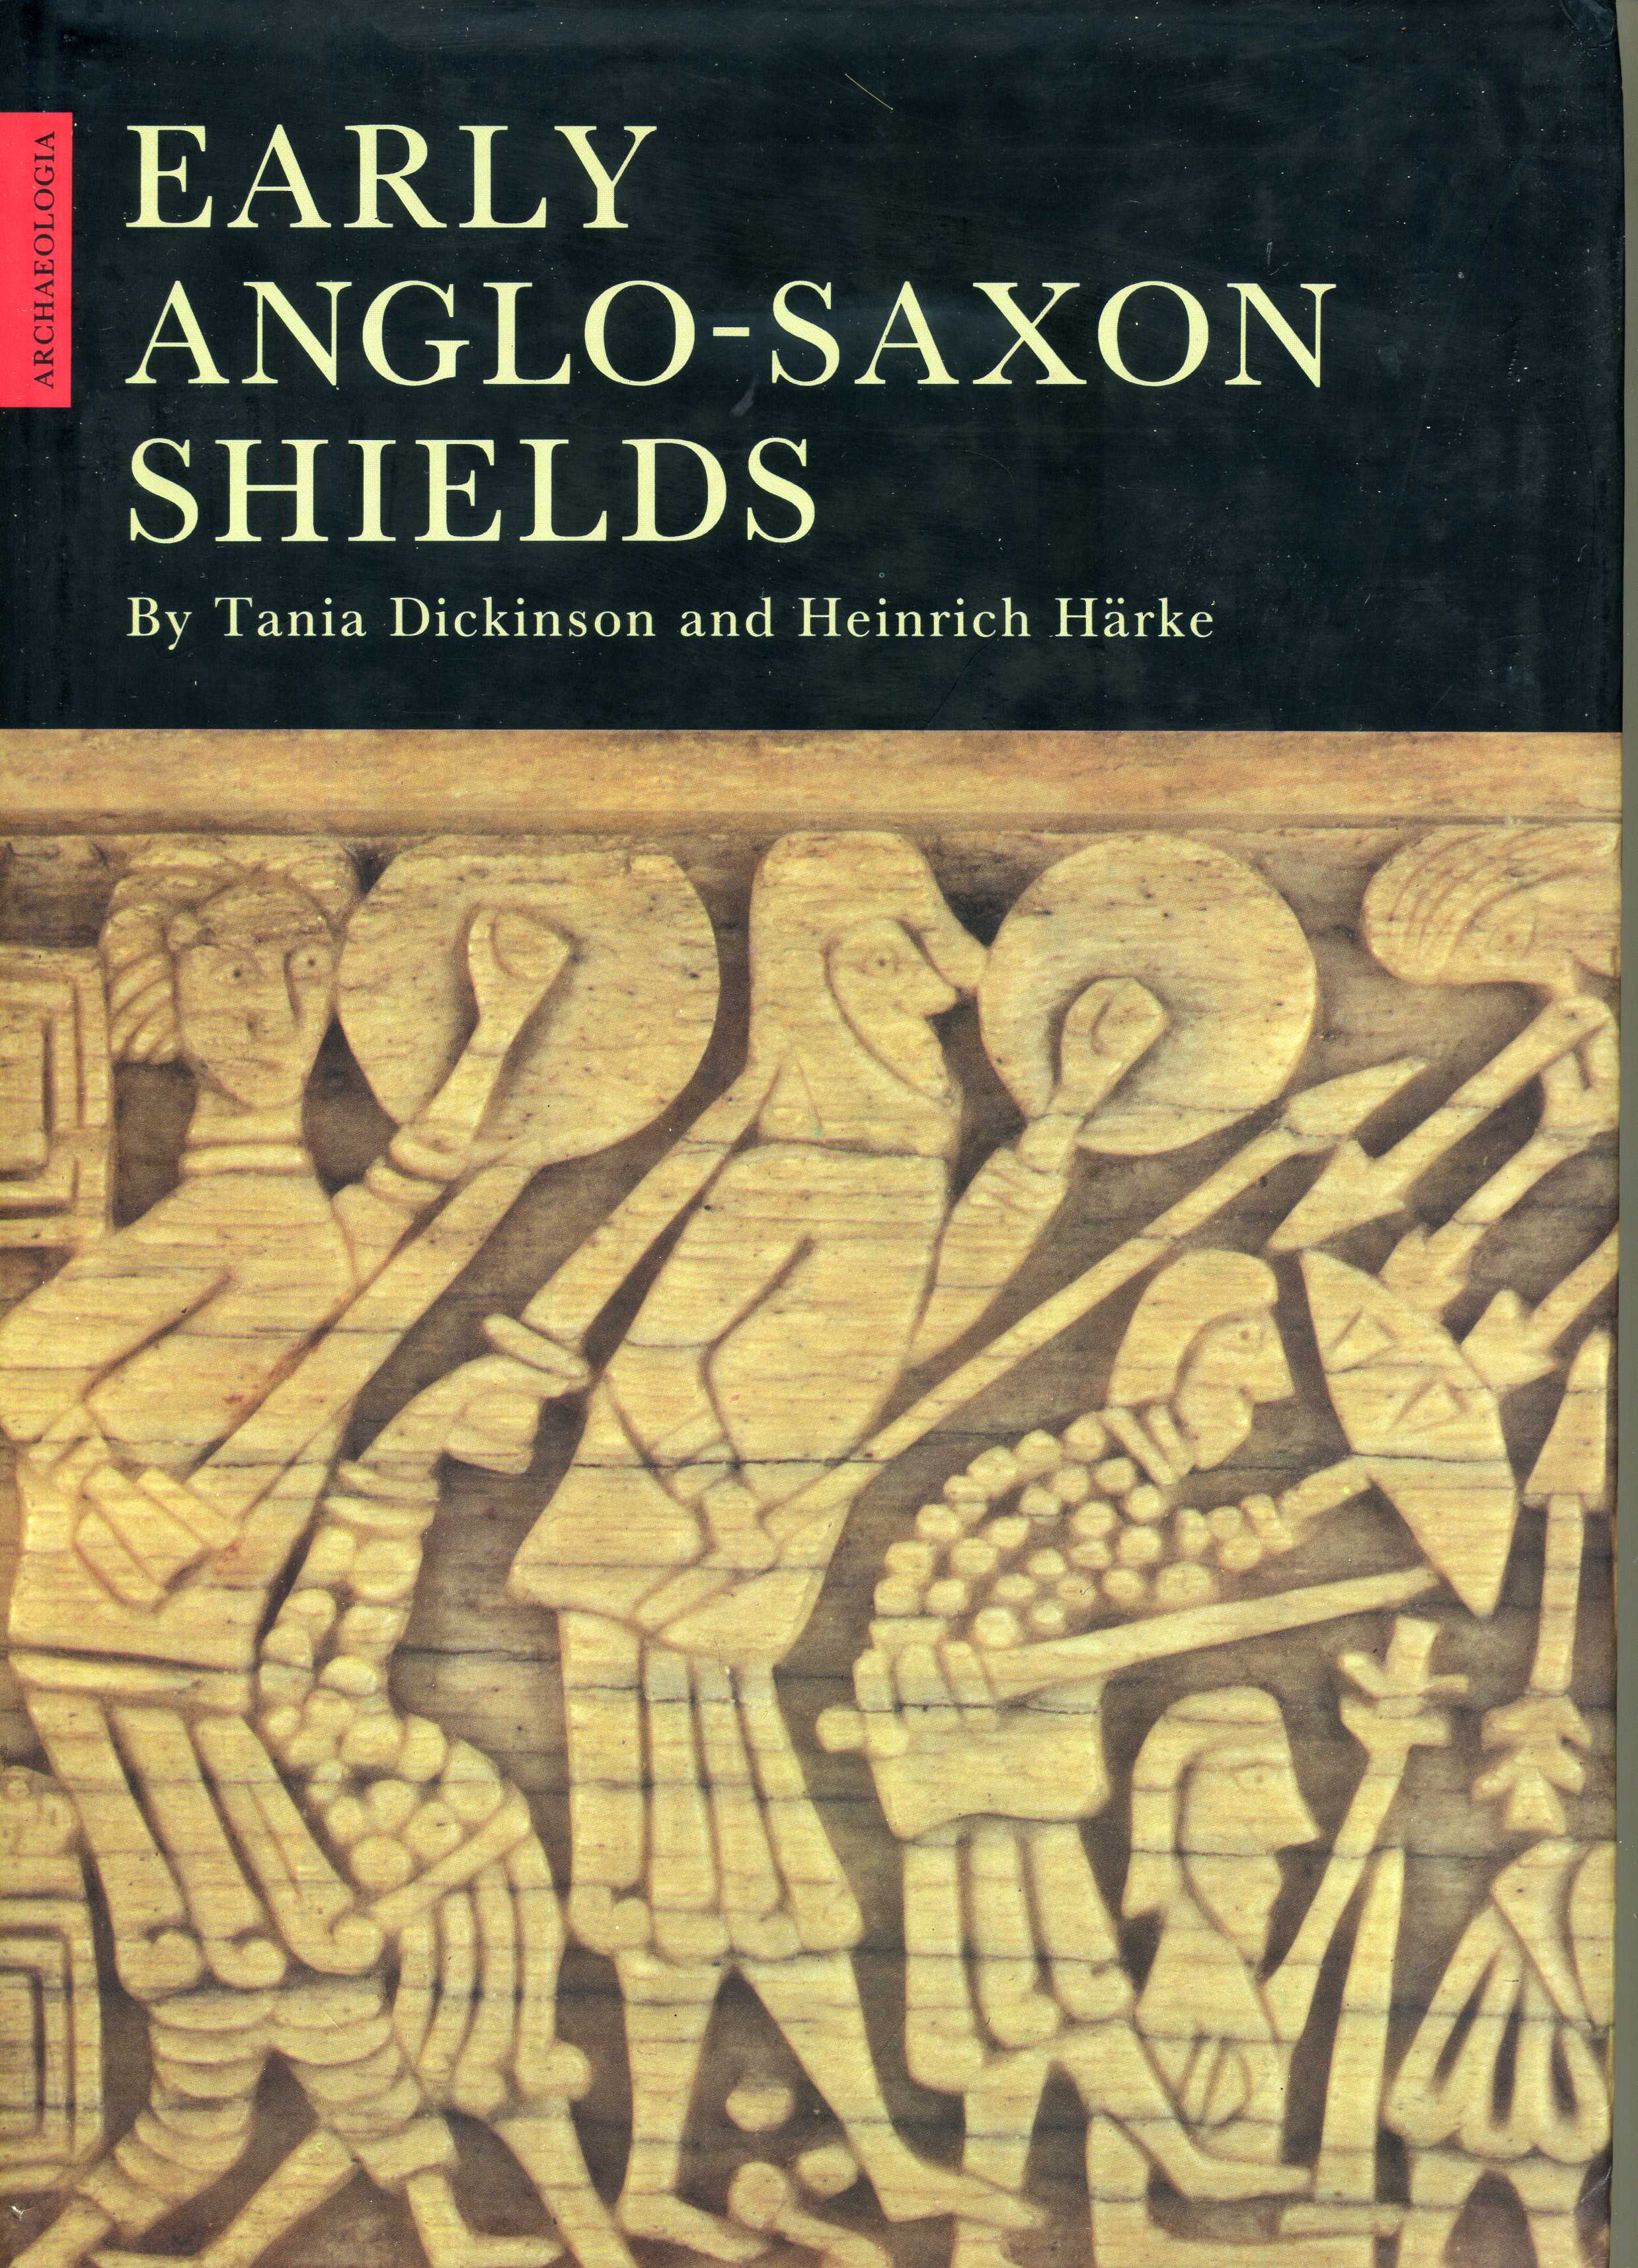 Early Anglo-Saxon shields